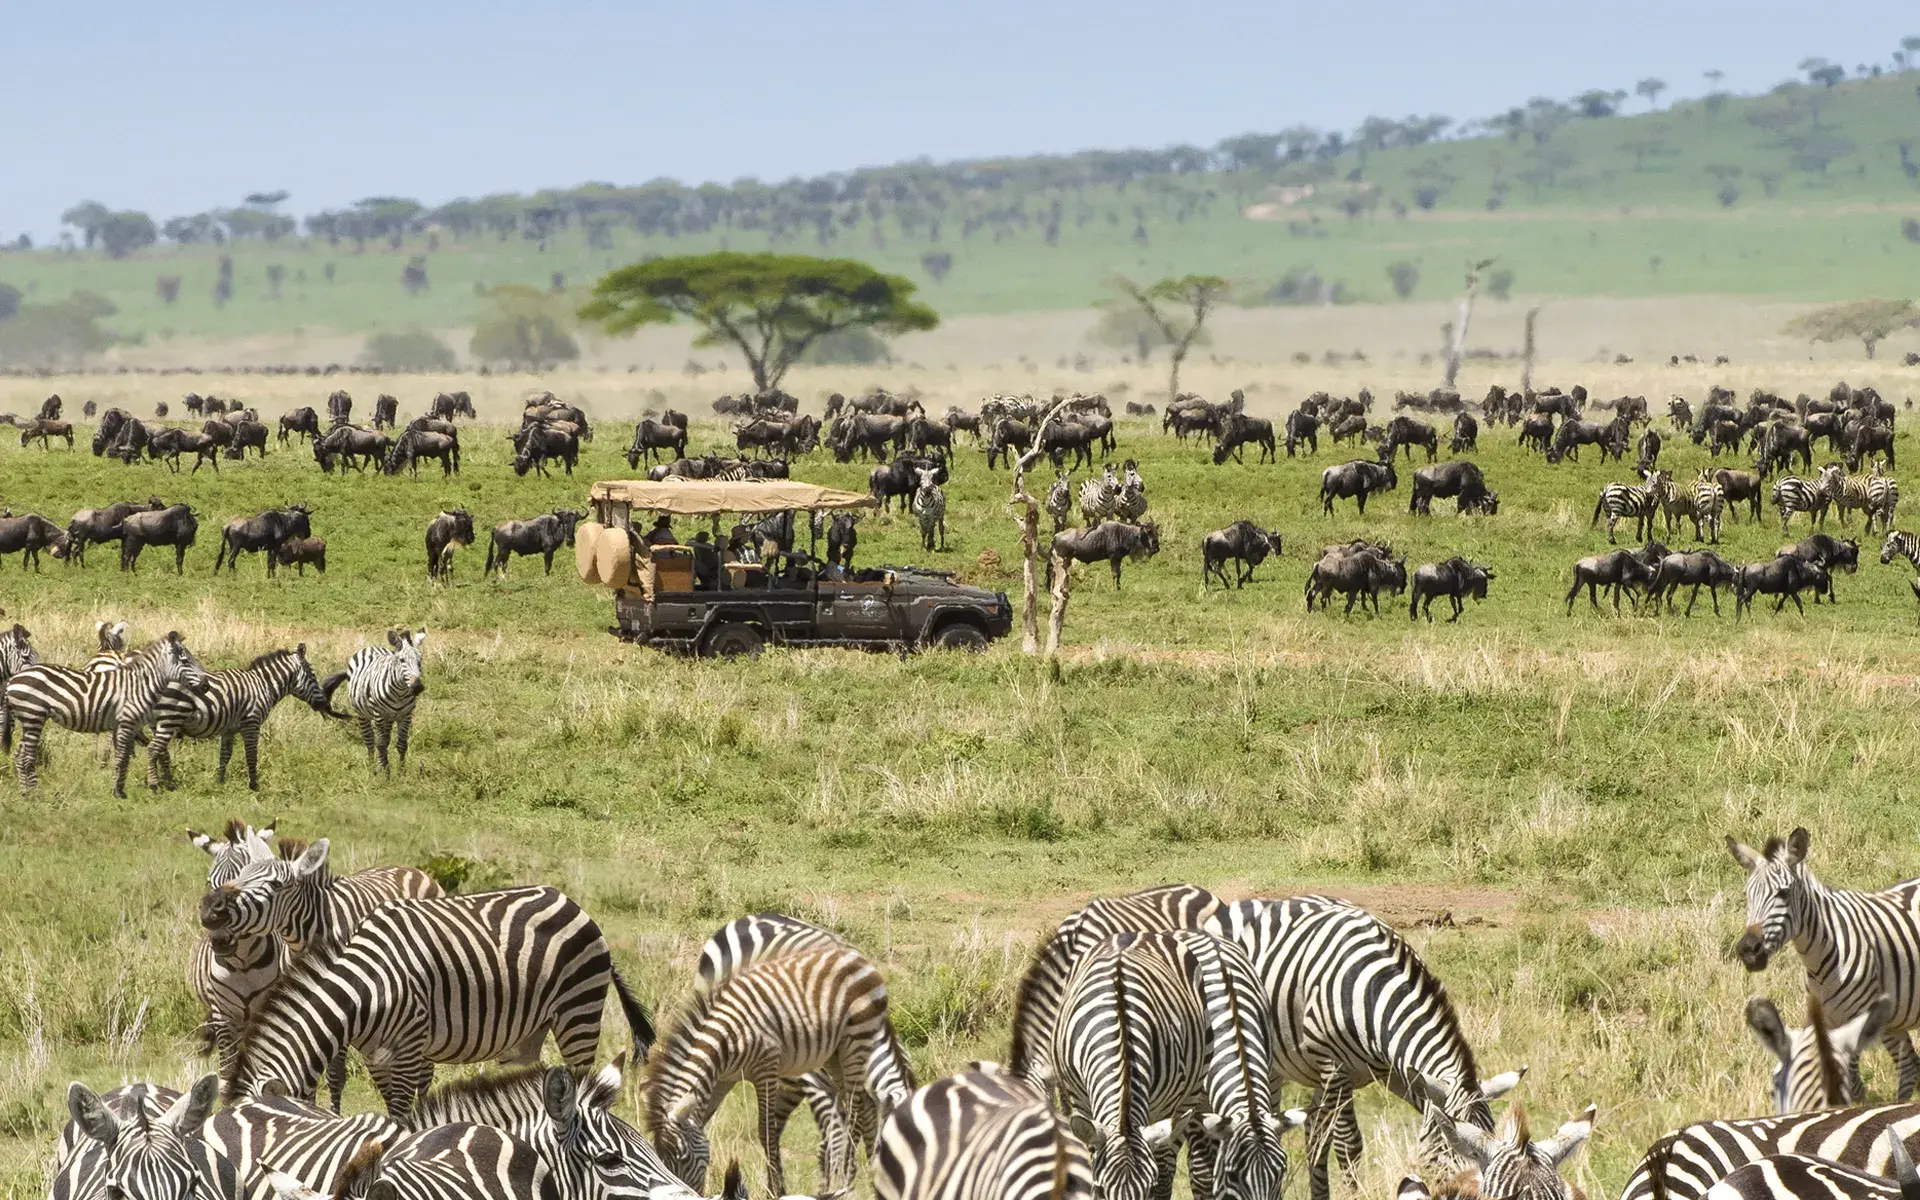 The great migration in Africa.